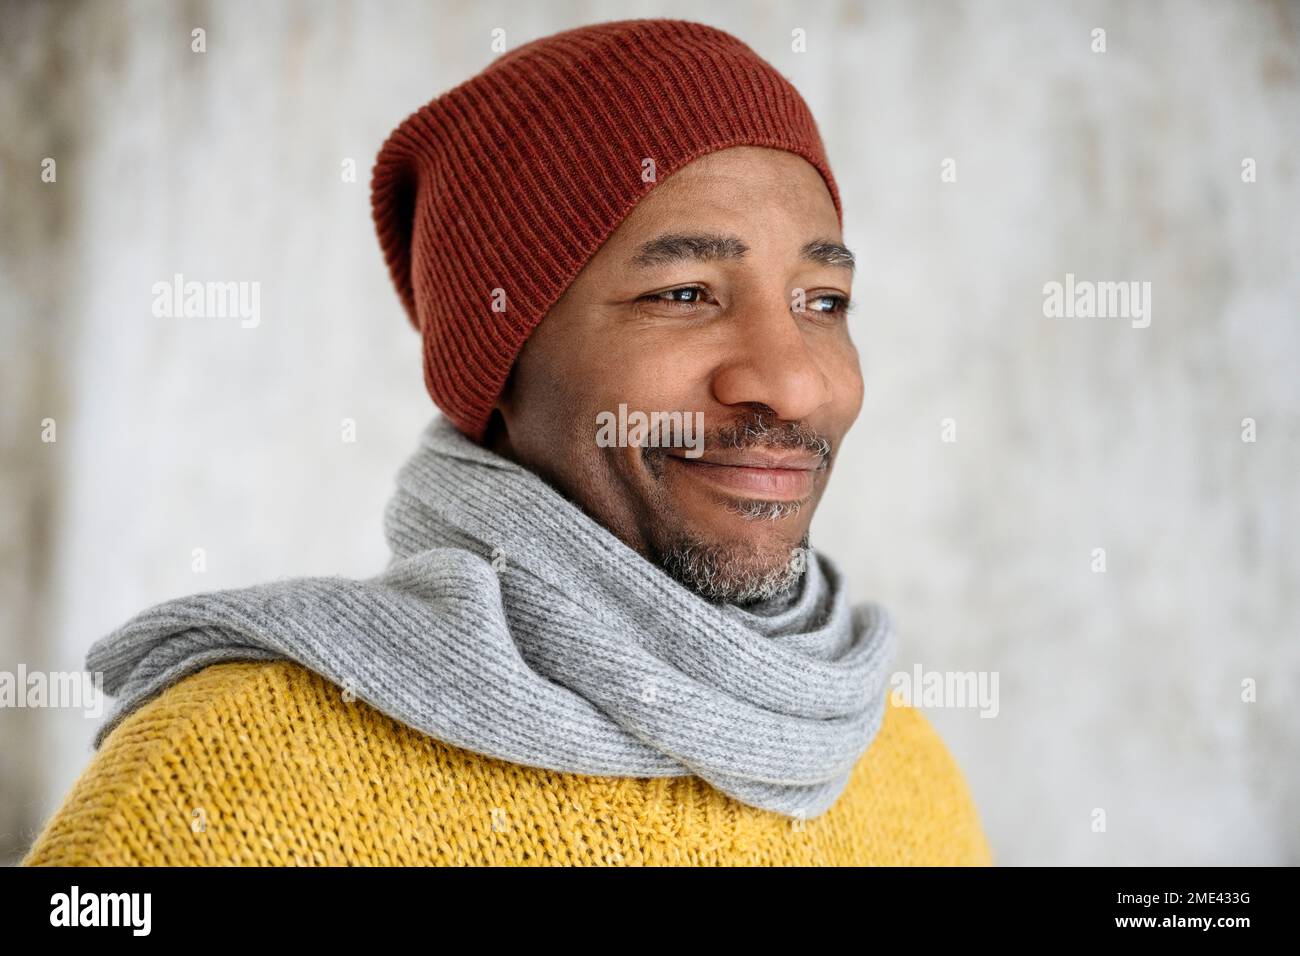 Smiling man wearing scarf and knit hat Stock Photo